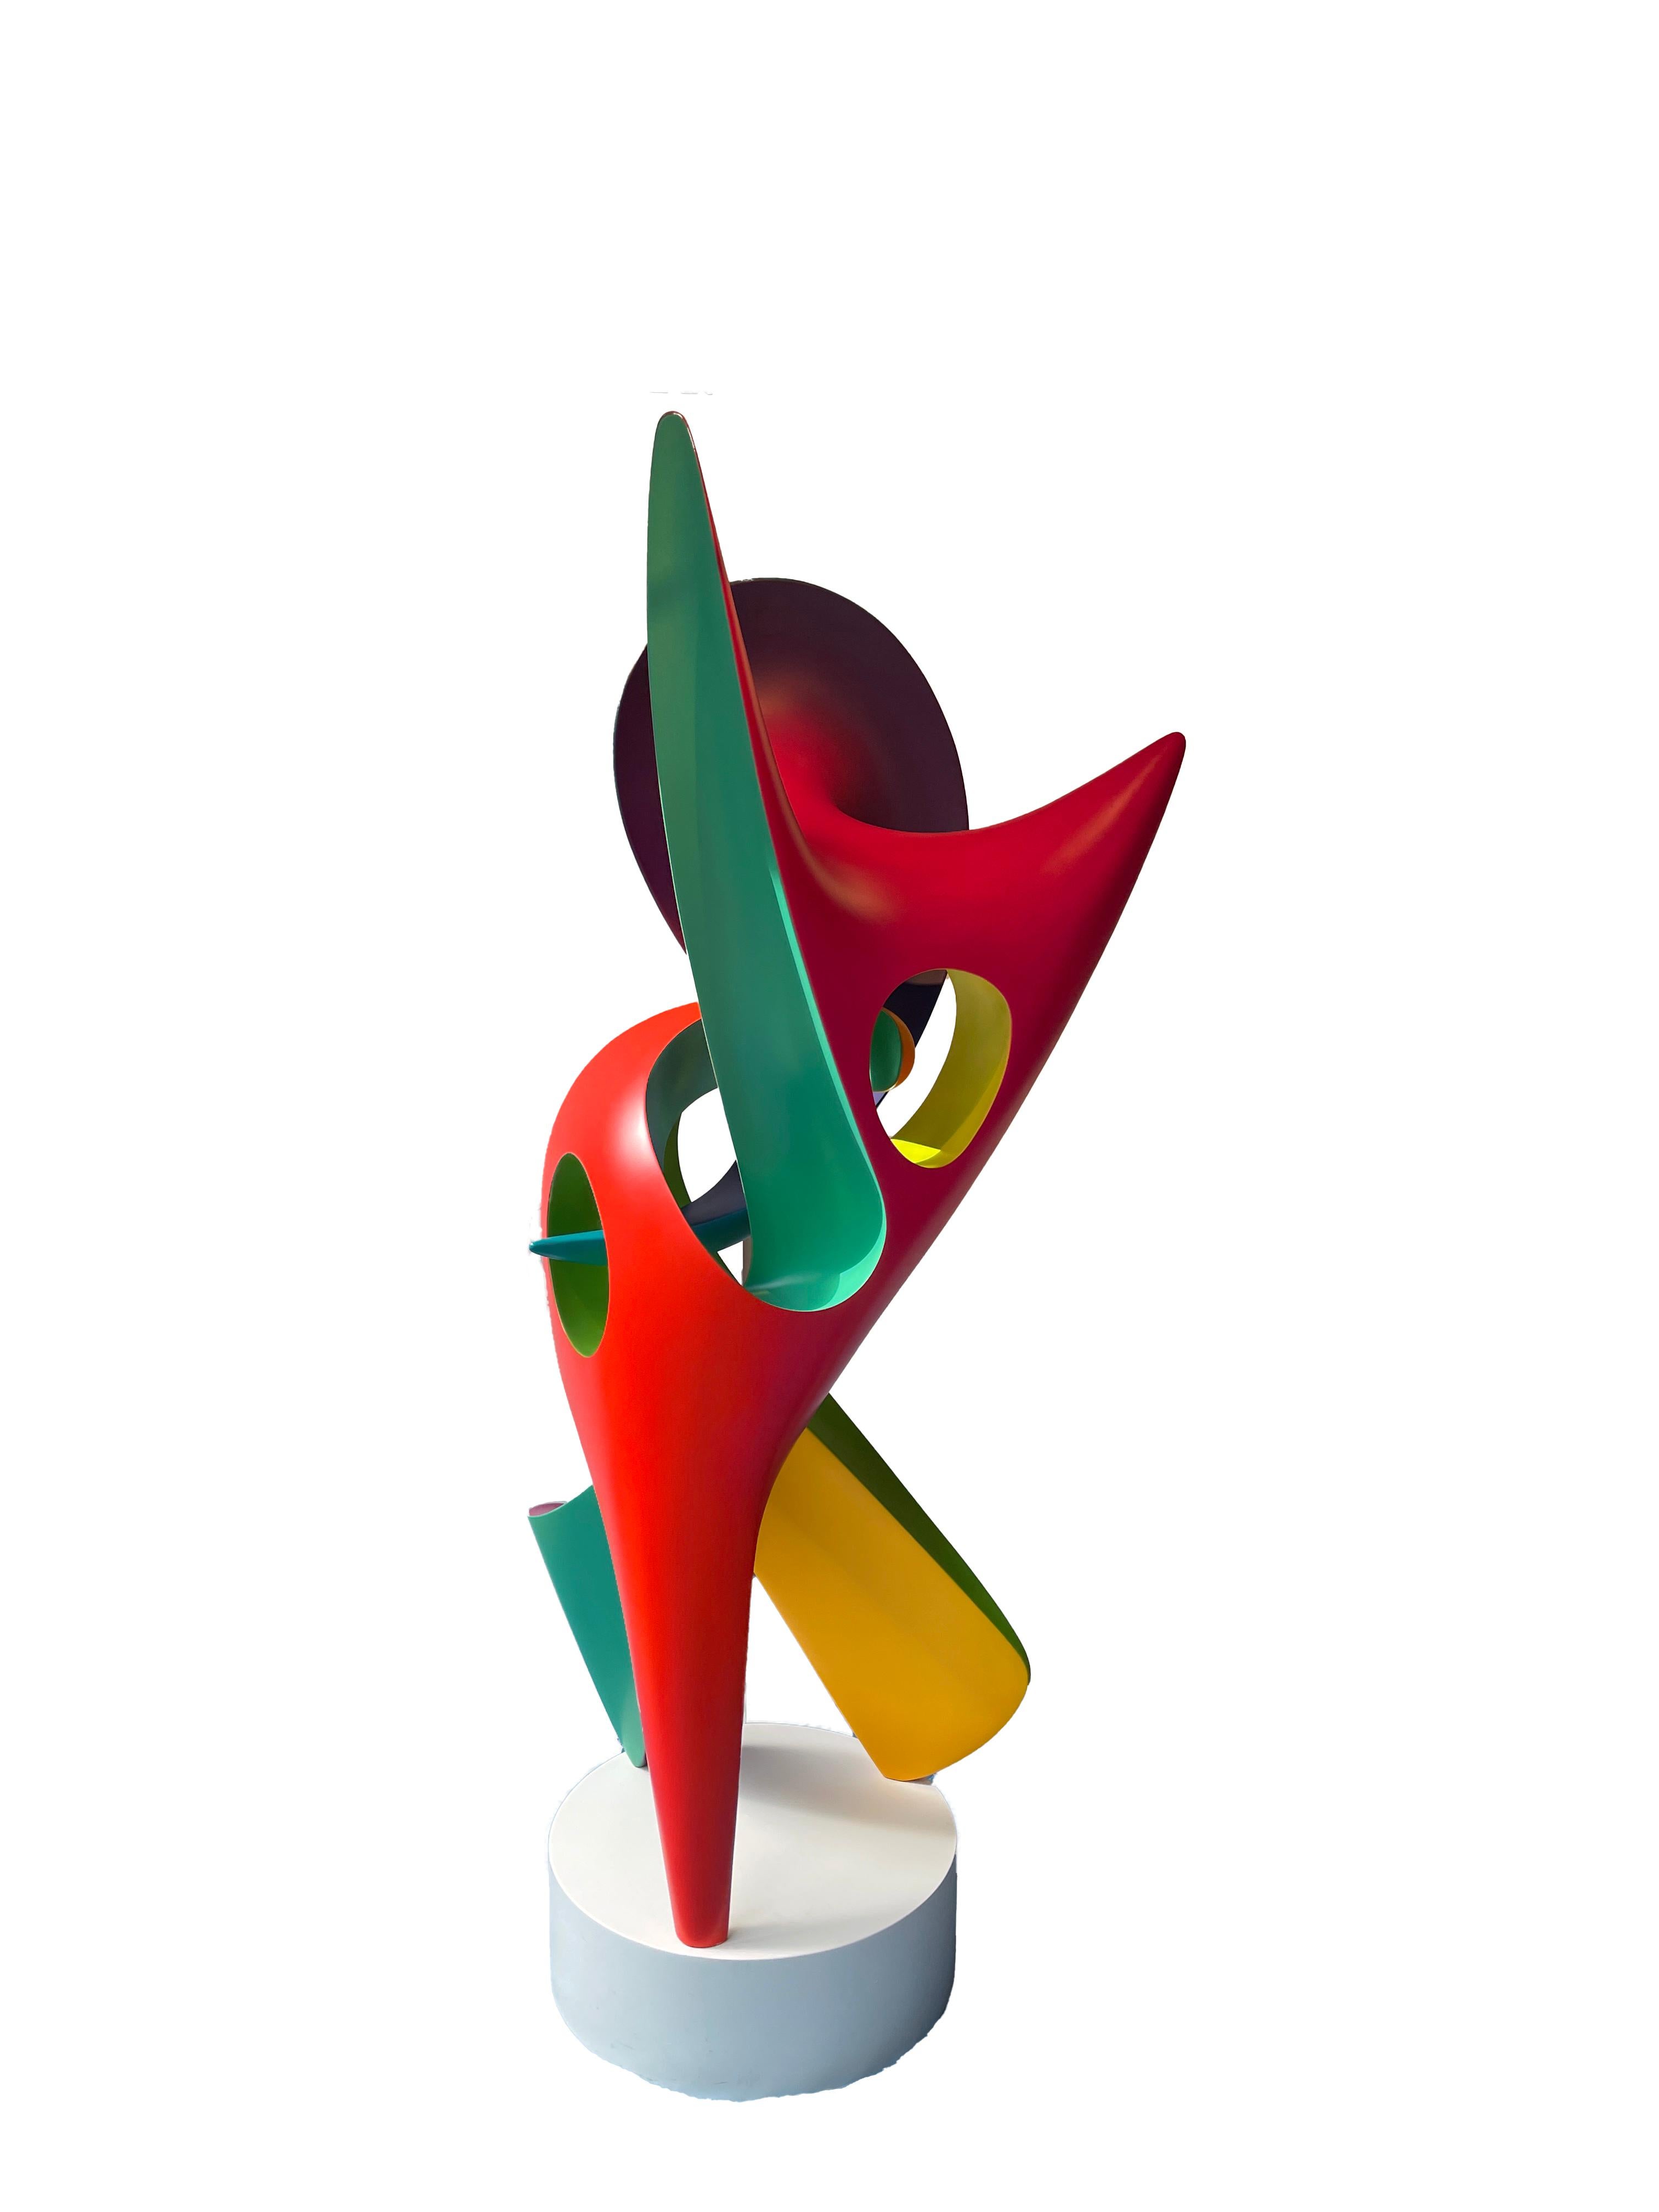 Tempest - Large Scale Brightly Colored Abstract Sculpture, Intertwined Form For Sale 3